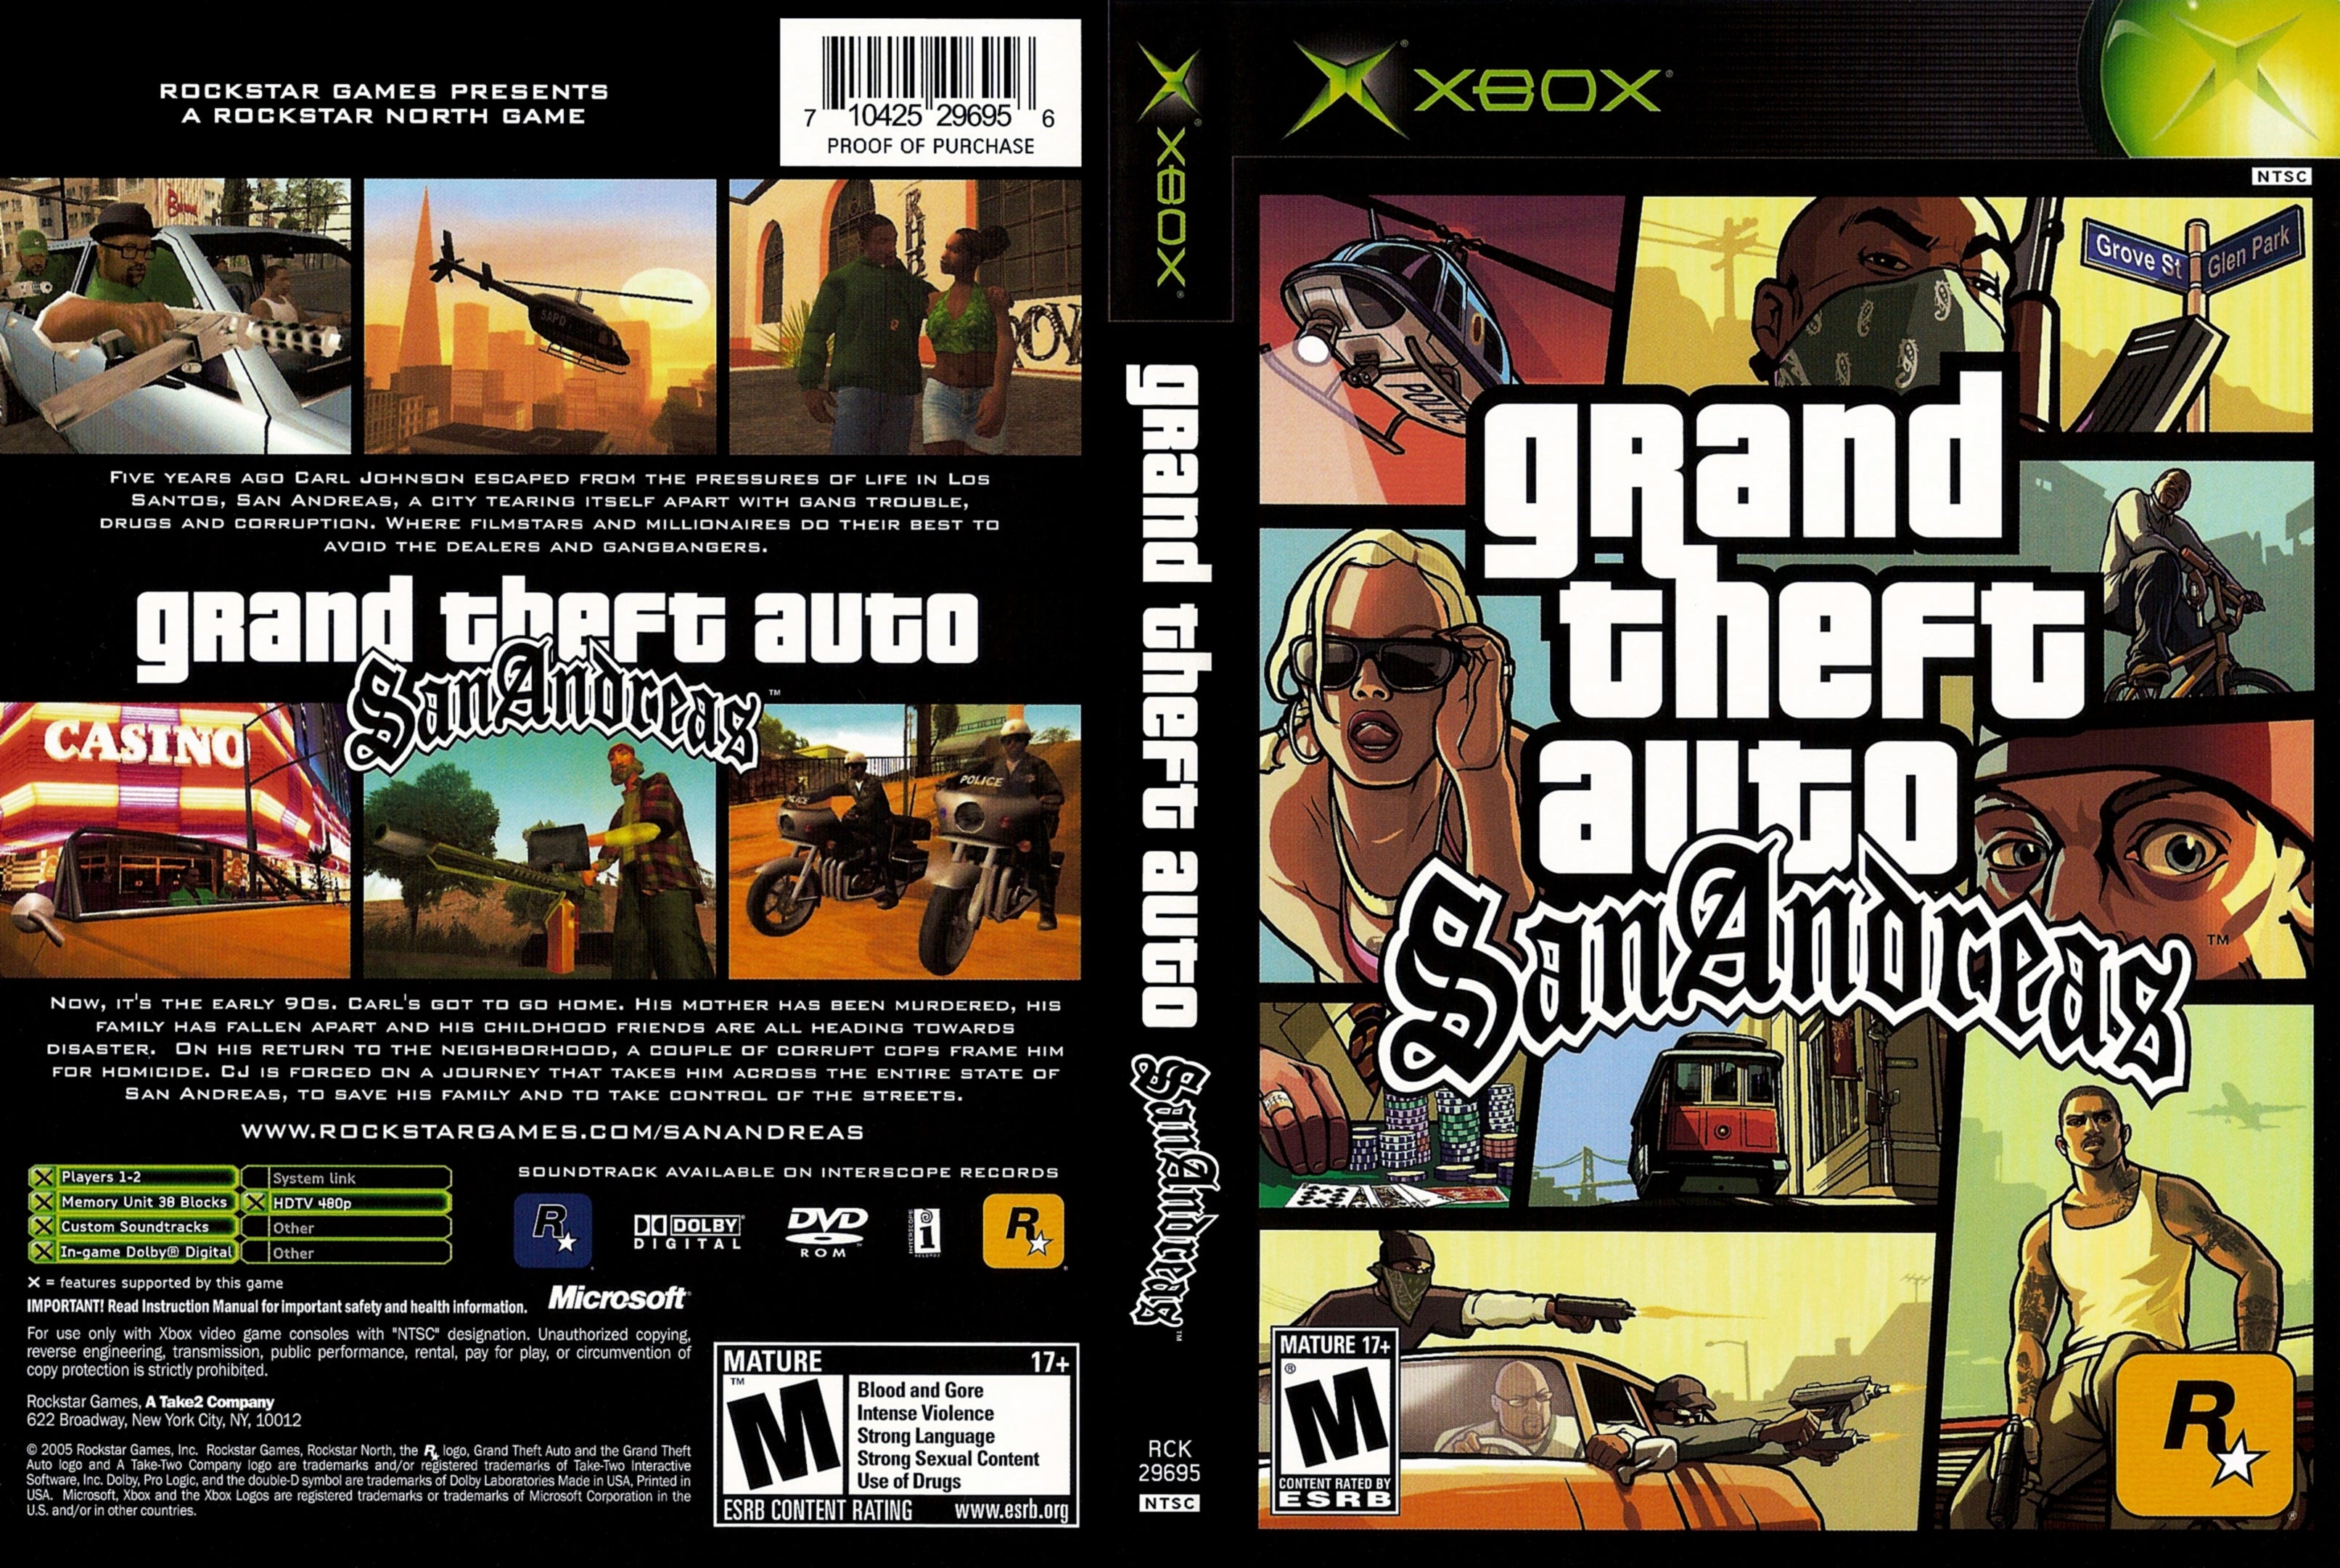 Grand Theft Auto San Andreas Mød (PS2 - PS3 - XBOX 360 - PC - ANDROID) 